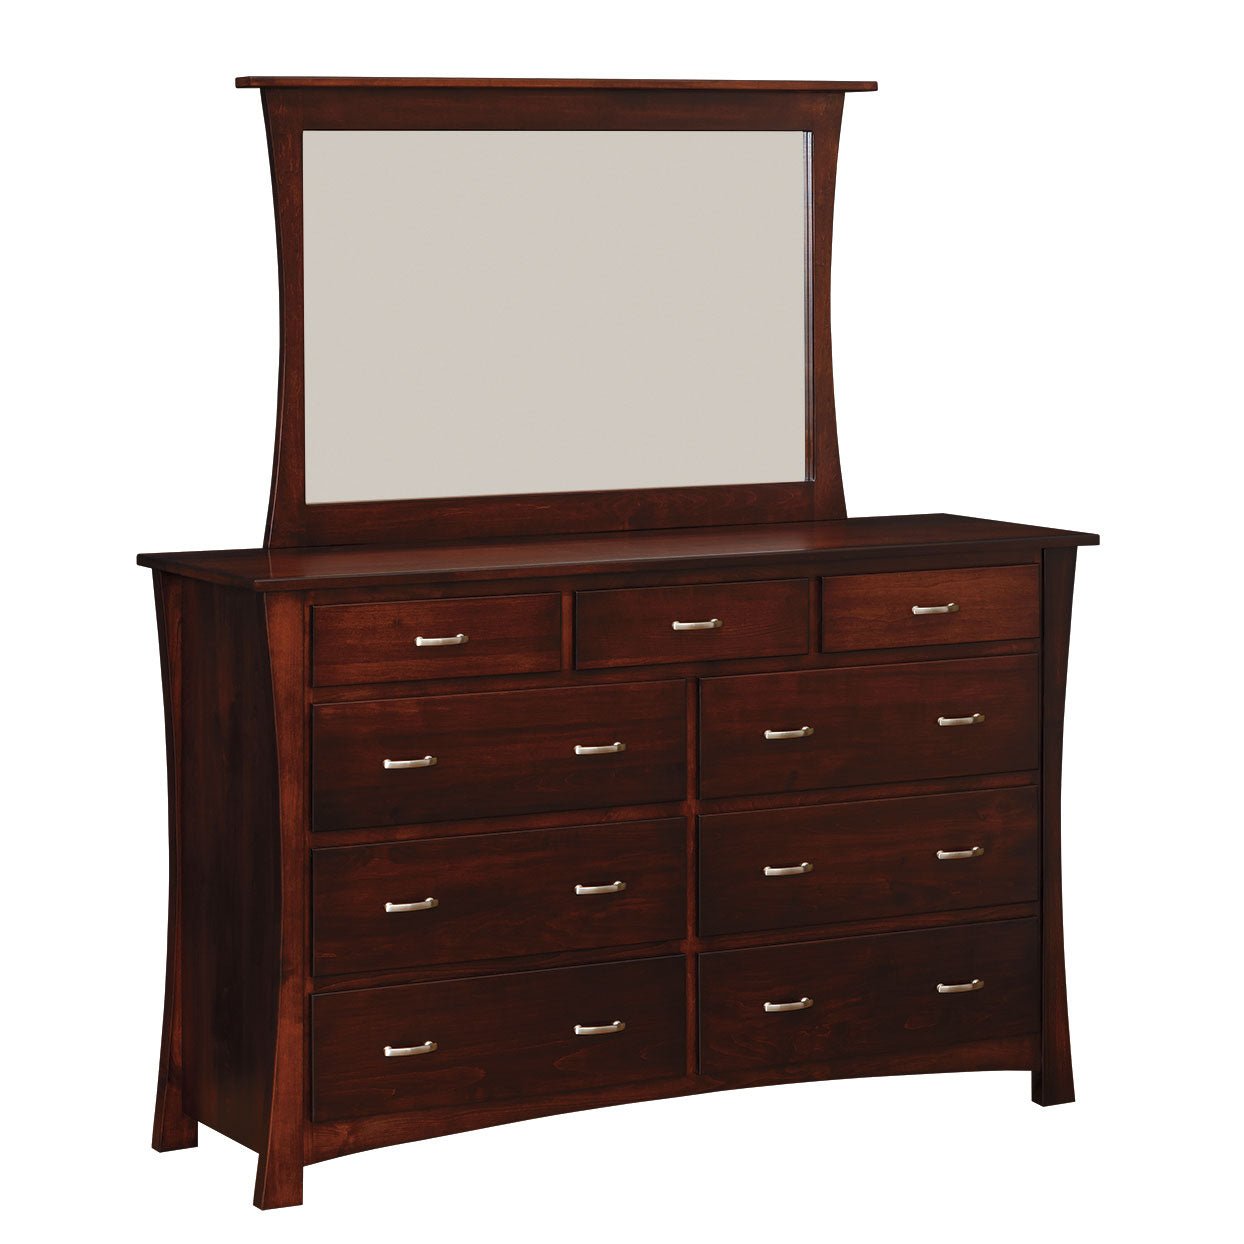 Oxford Classic Bedroom Furniture Set - Countryside Amish Furniture